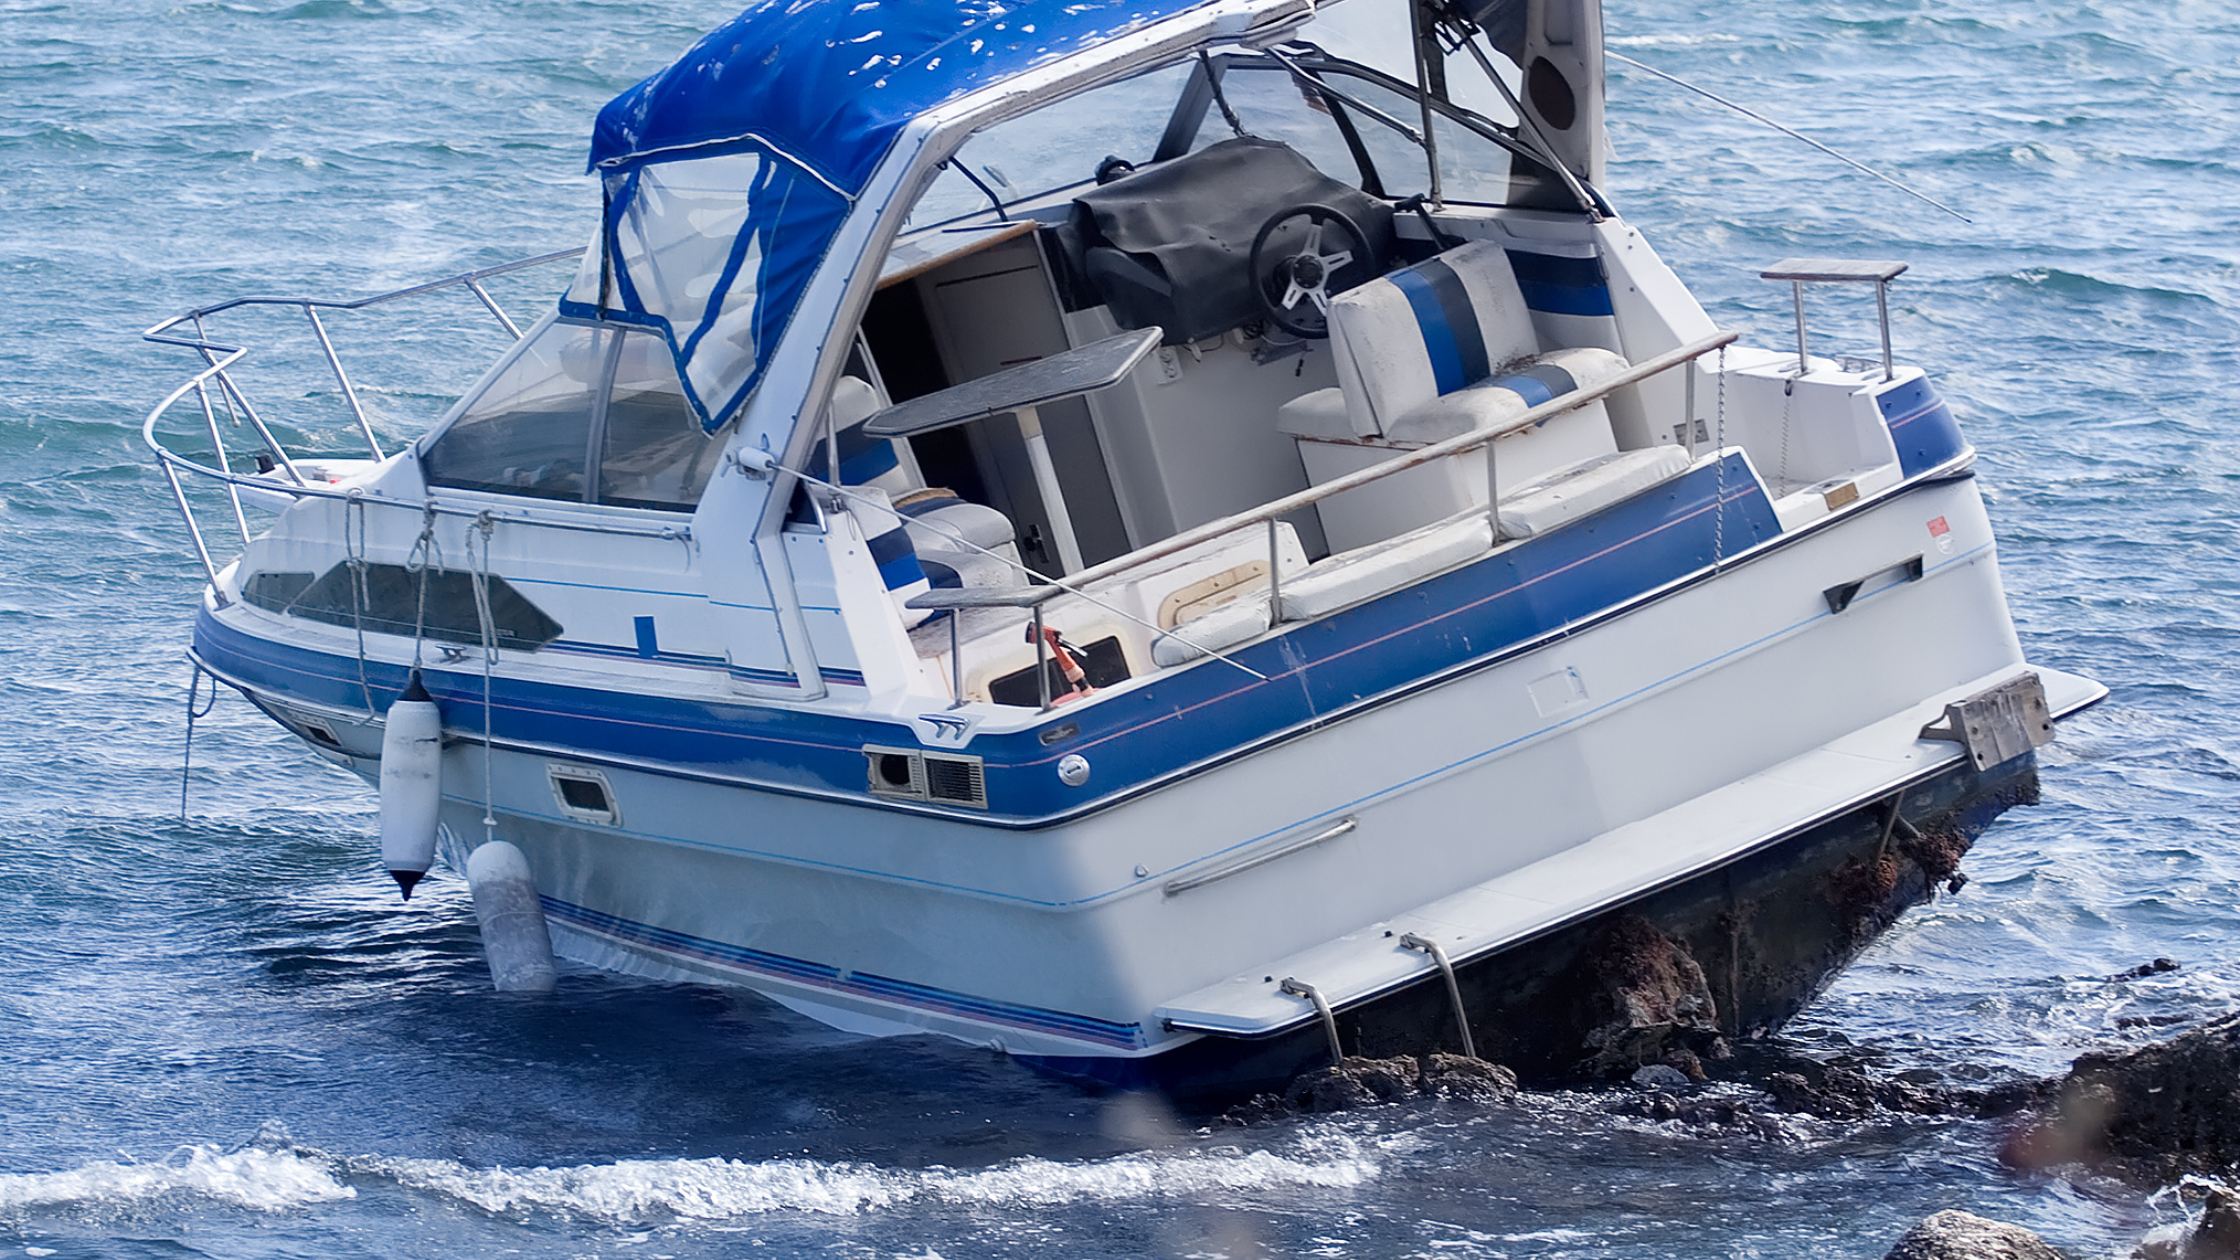 Boat Accident Lawyer InSan Diego, CA